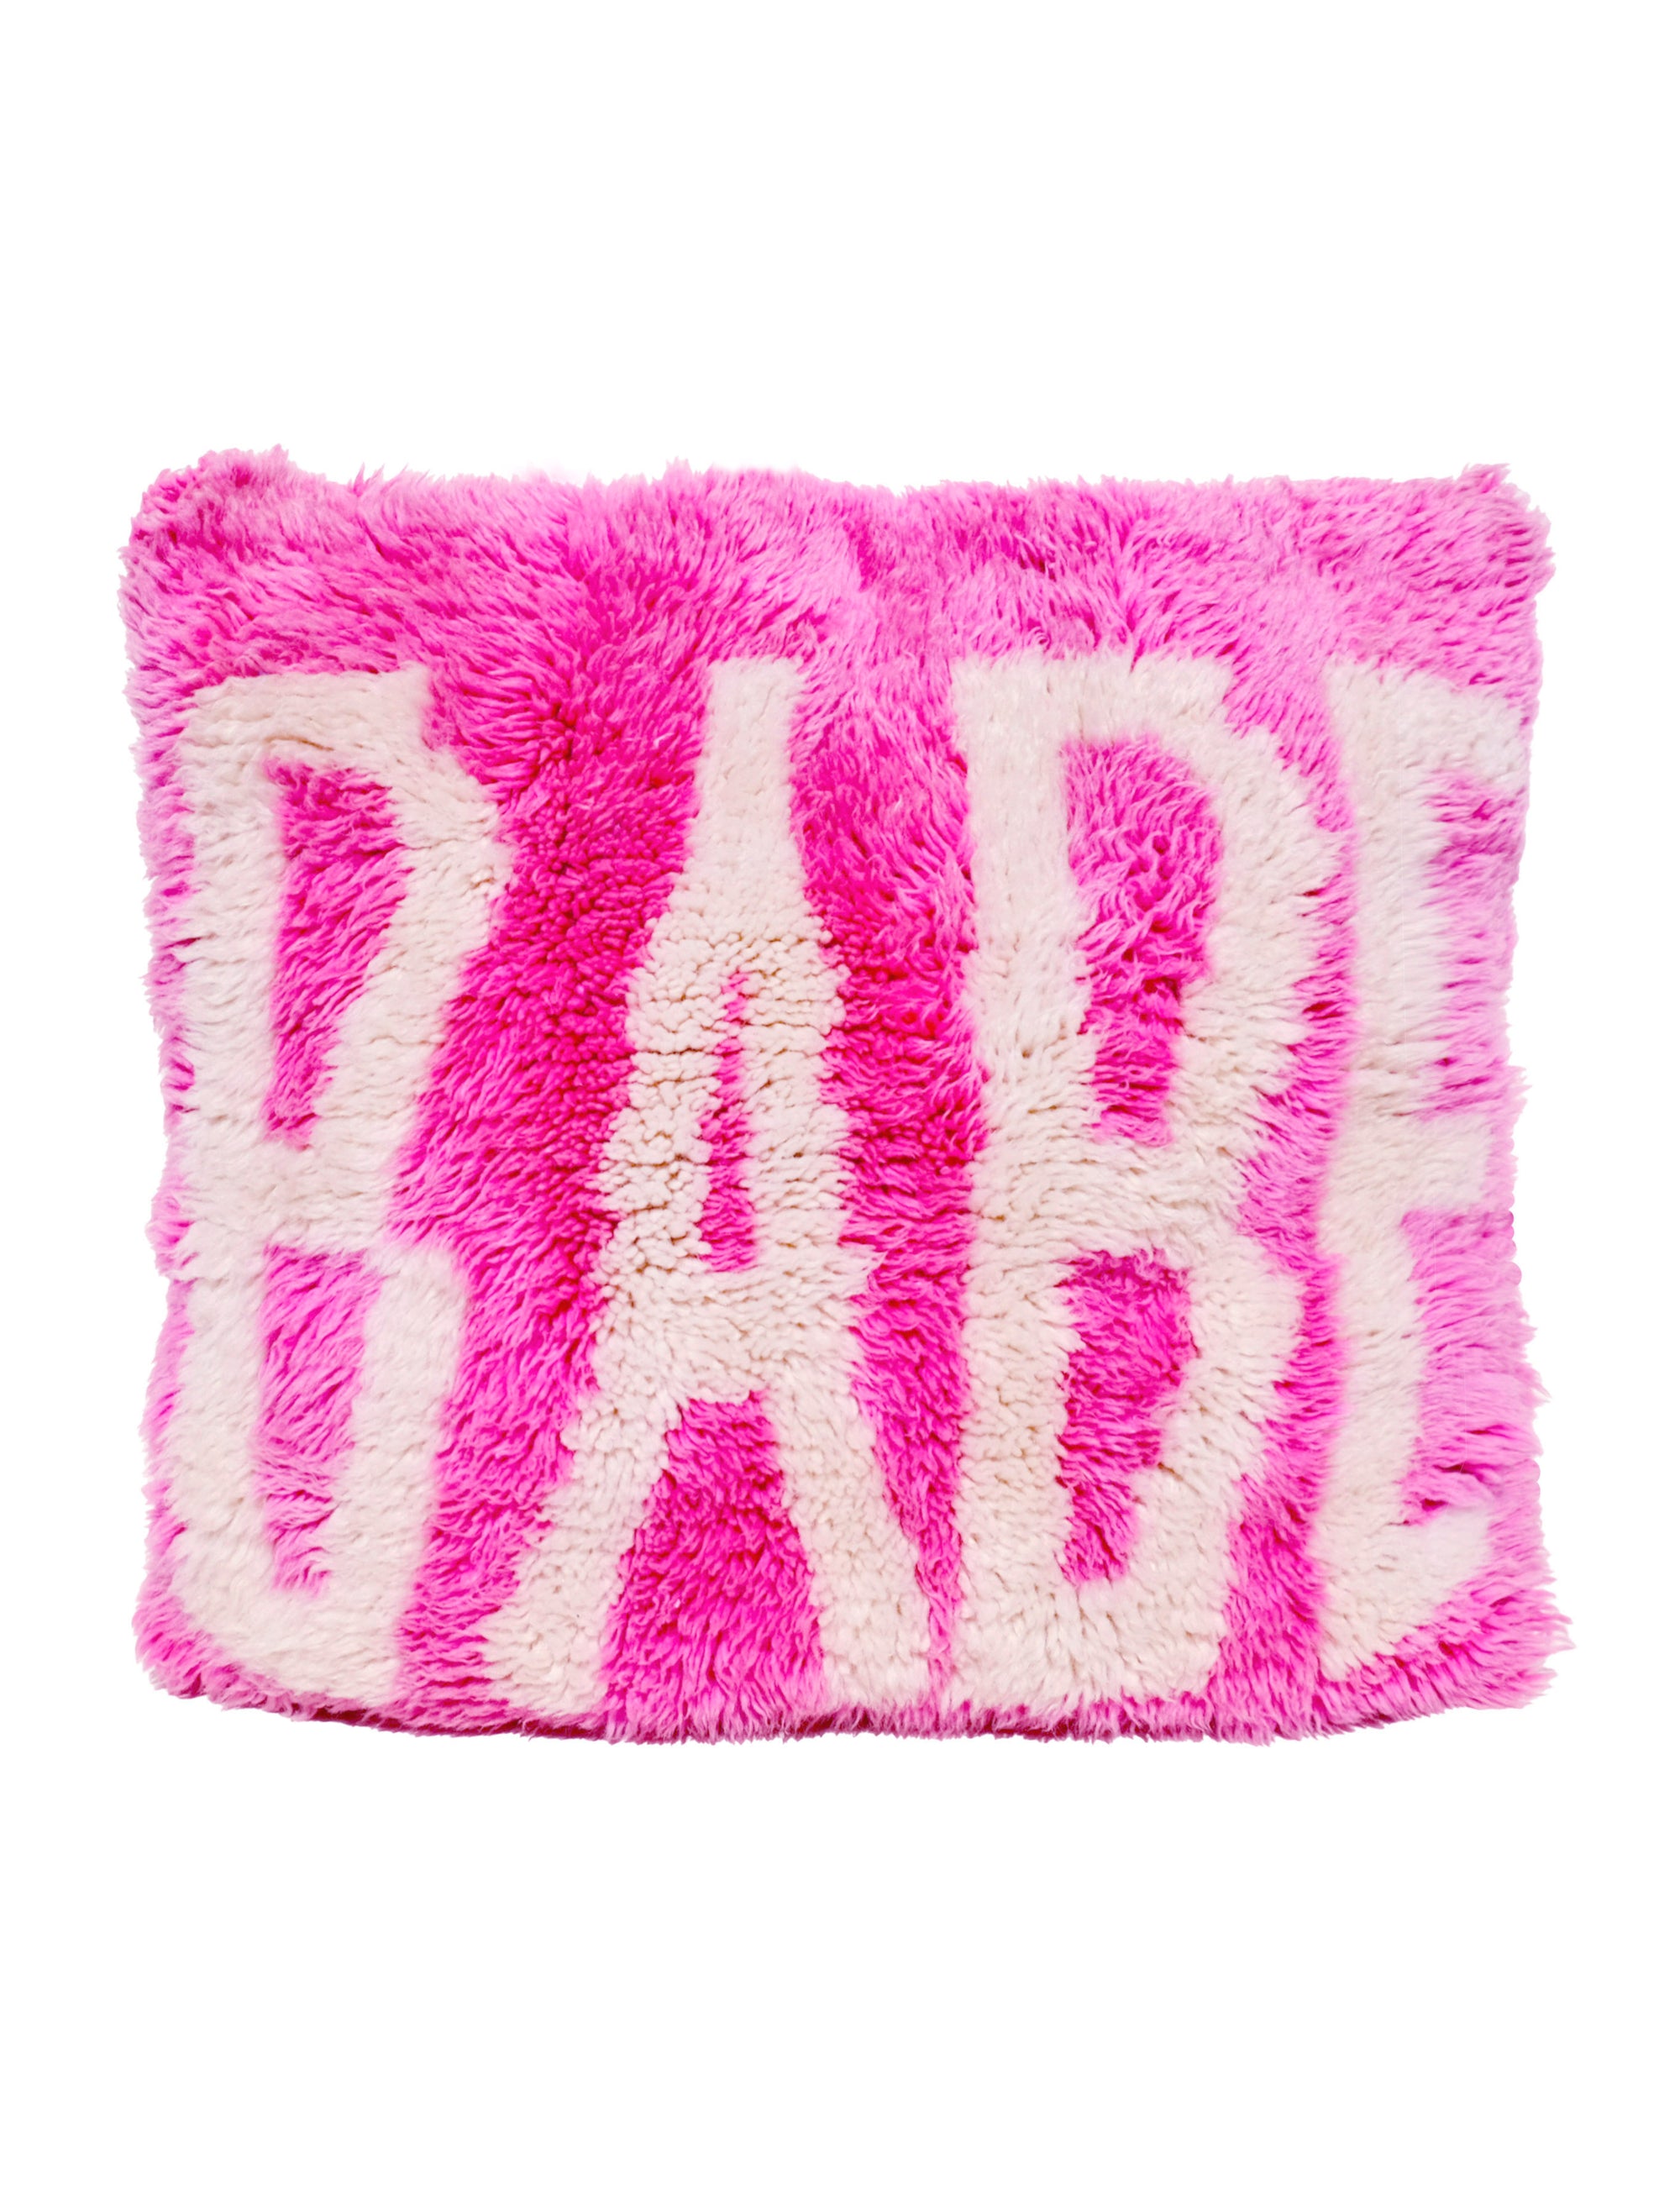 Meet our latest cushion made from a Beni Mrirt rug. Vibrant neon pink, adorned with the word "BABE" in white yarn, this 55x55cm delight effortlessly infuses joy into any space. It's not just decor; it's a celebration of style and comfort. Watch your room bloom with the playful charm of "Babe in Bloom," a vivid testament to the power of color and design.